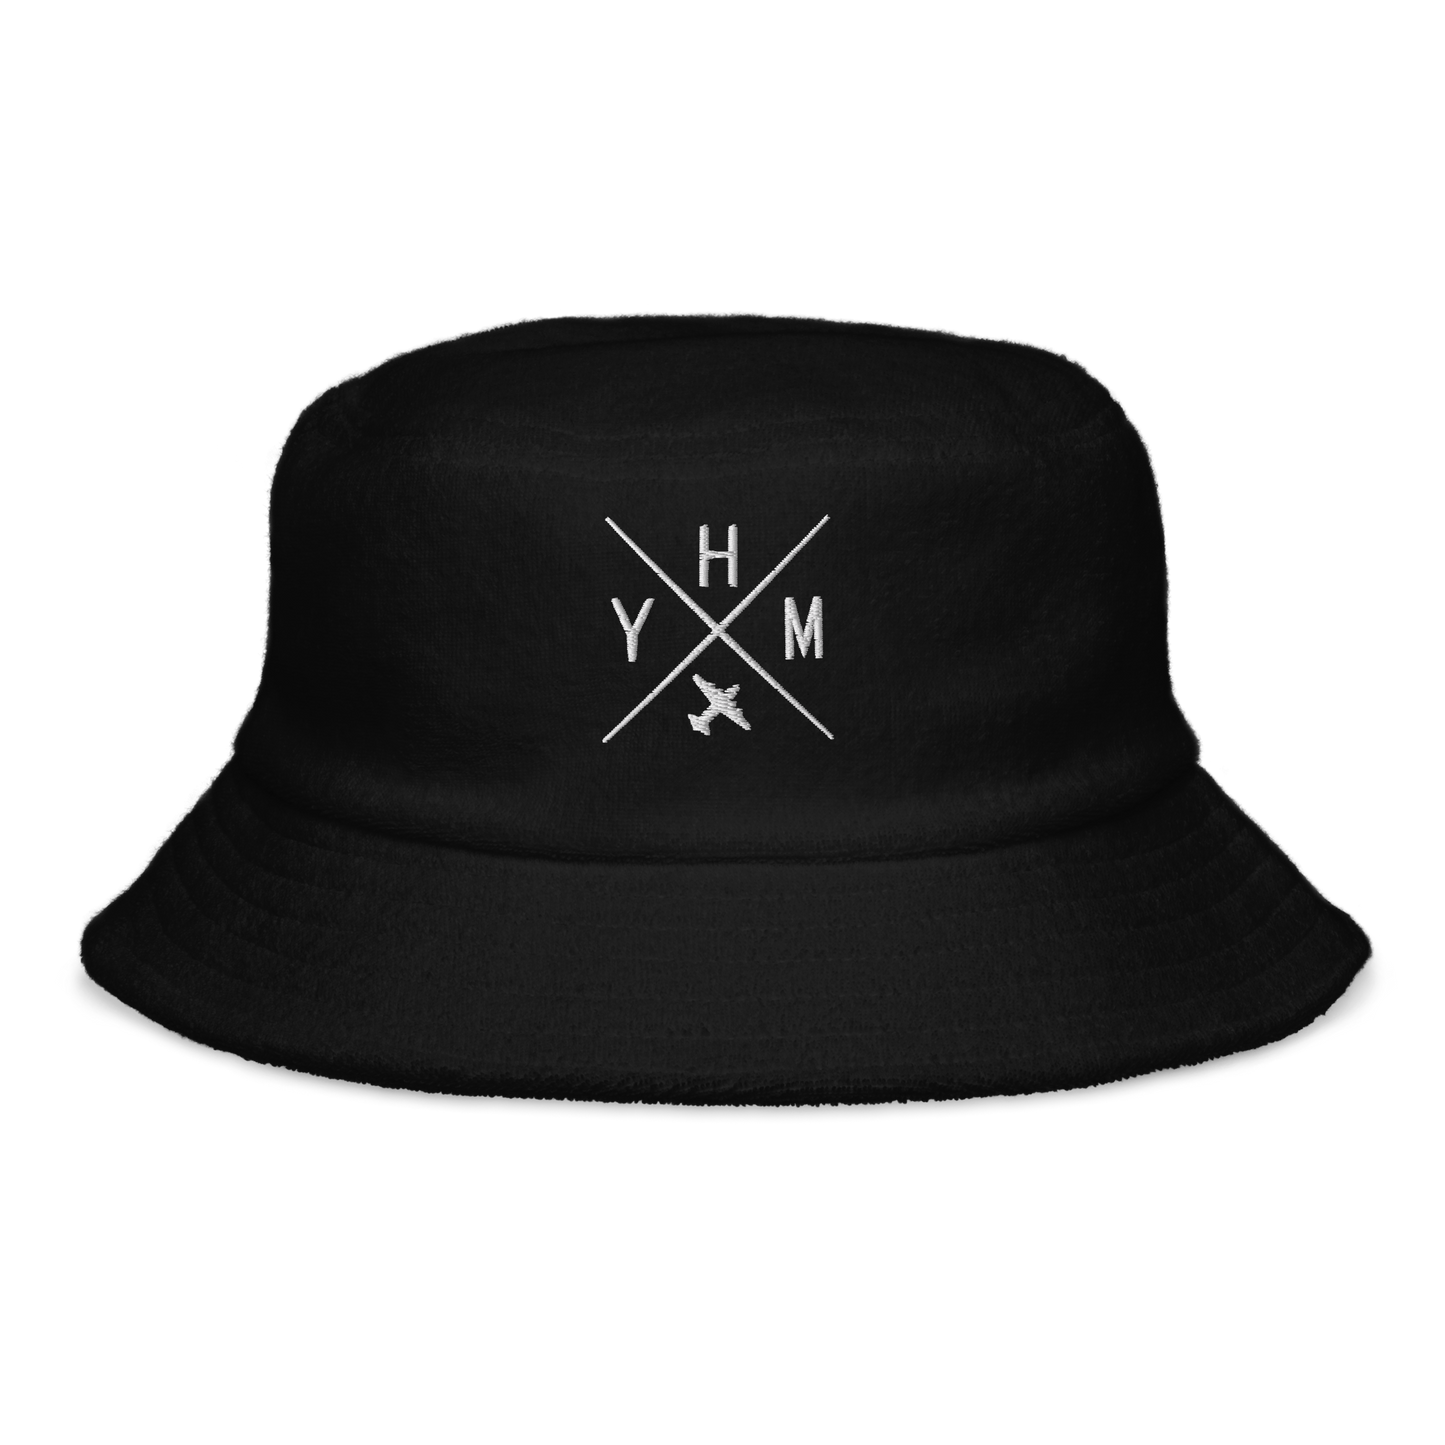 Crossed-X Unstructured Terry Cloth Bucket Hat • White Embroidery